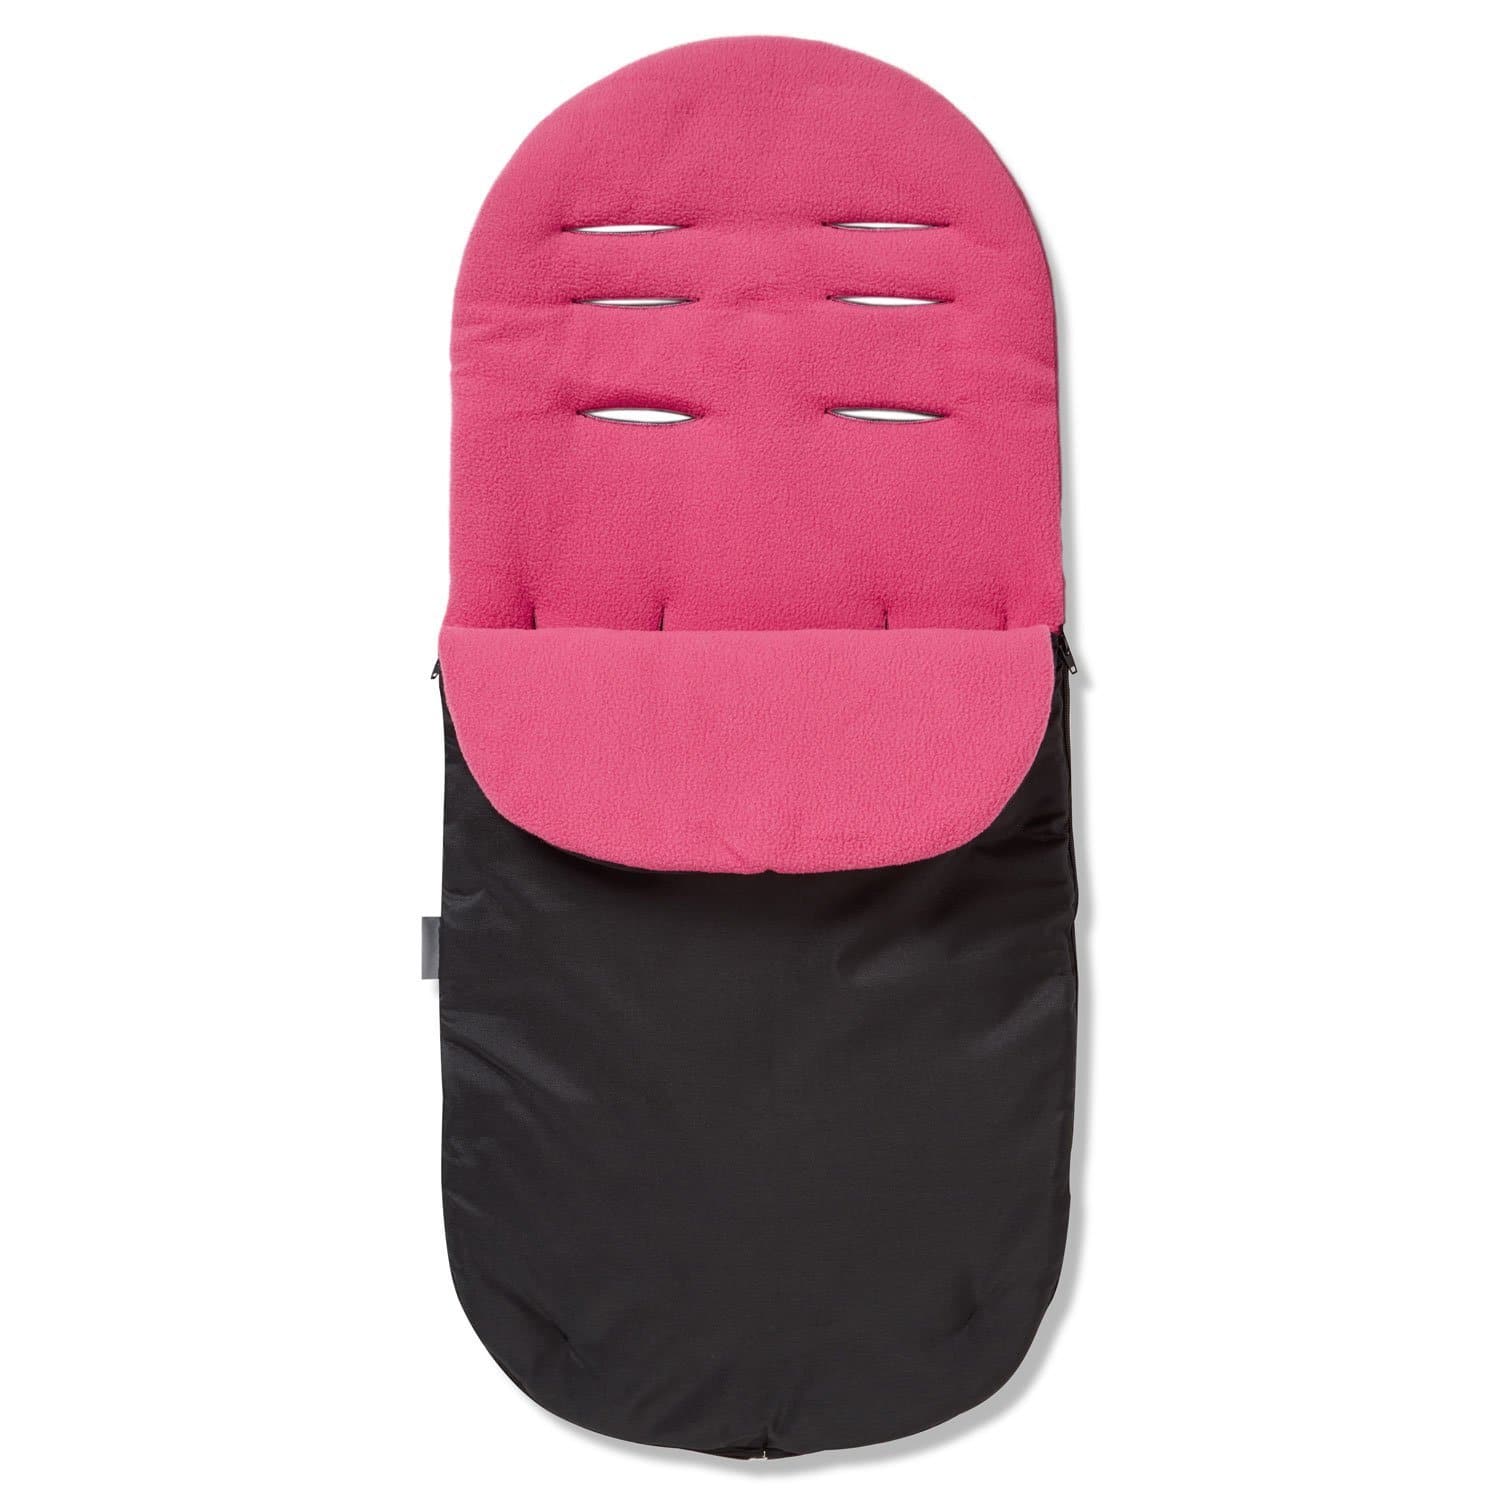 Footmuff / Cosy Toes Compatible with Combi - Dark Pink / Fits All Models | For Your Little One